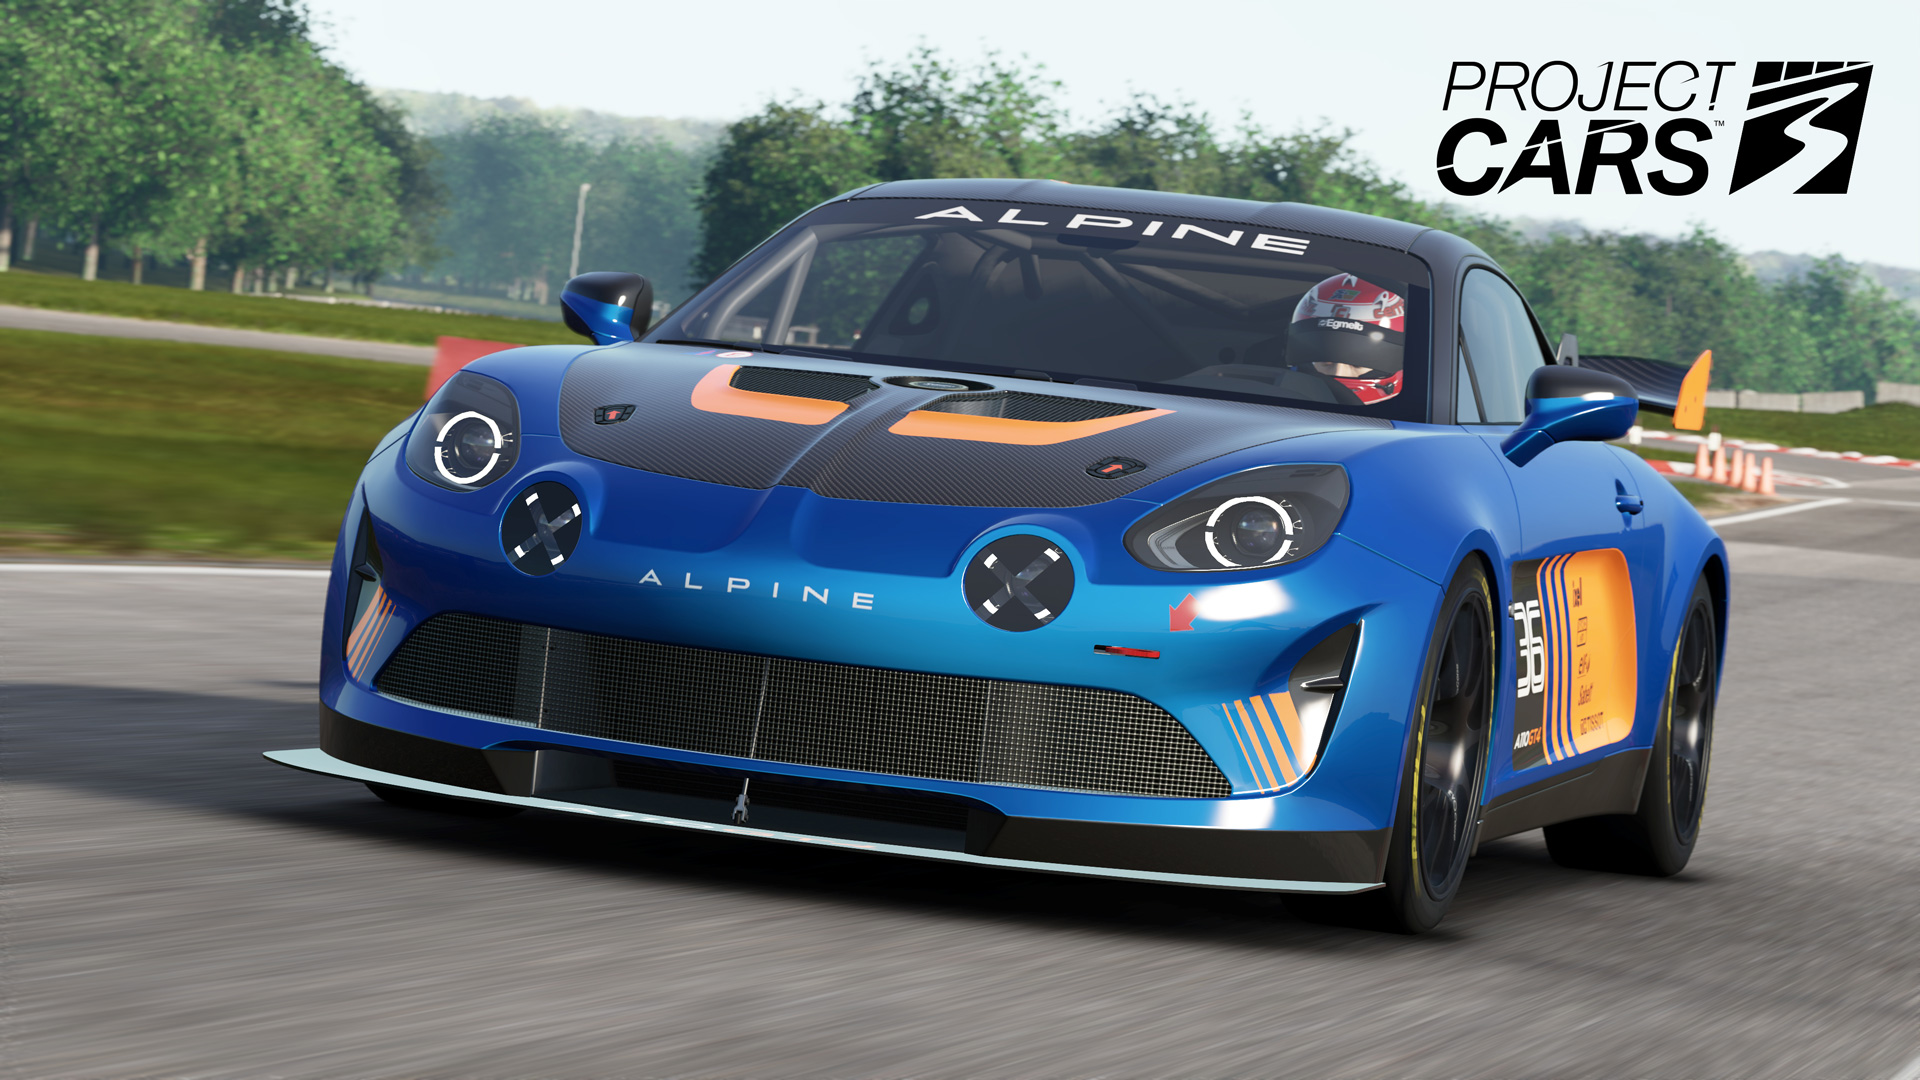 Project CARS 3 Available Now: The Dev Team’s Favorite Performance Car Upgrades